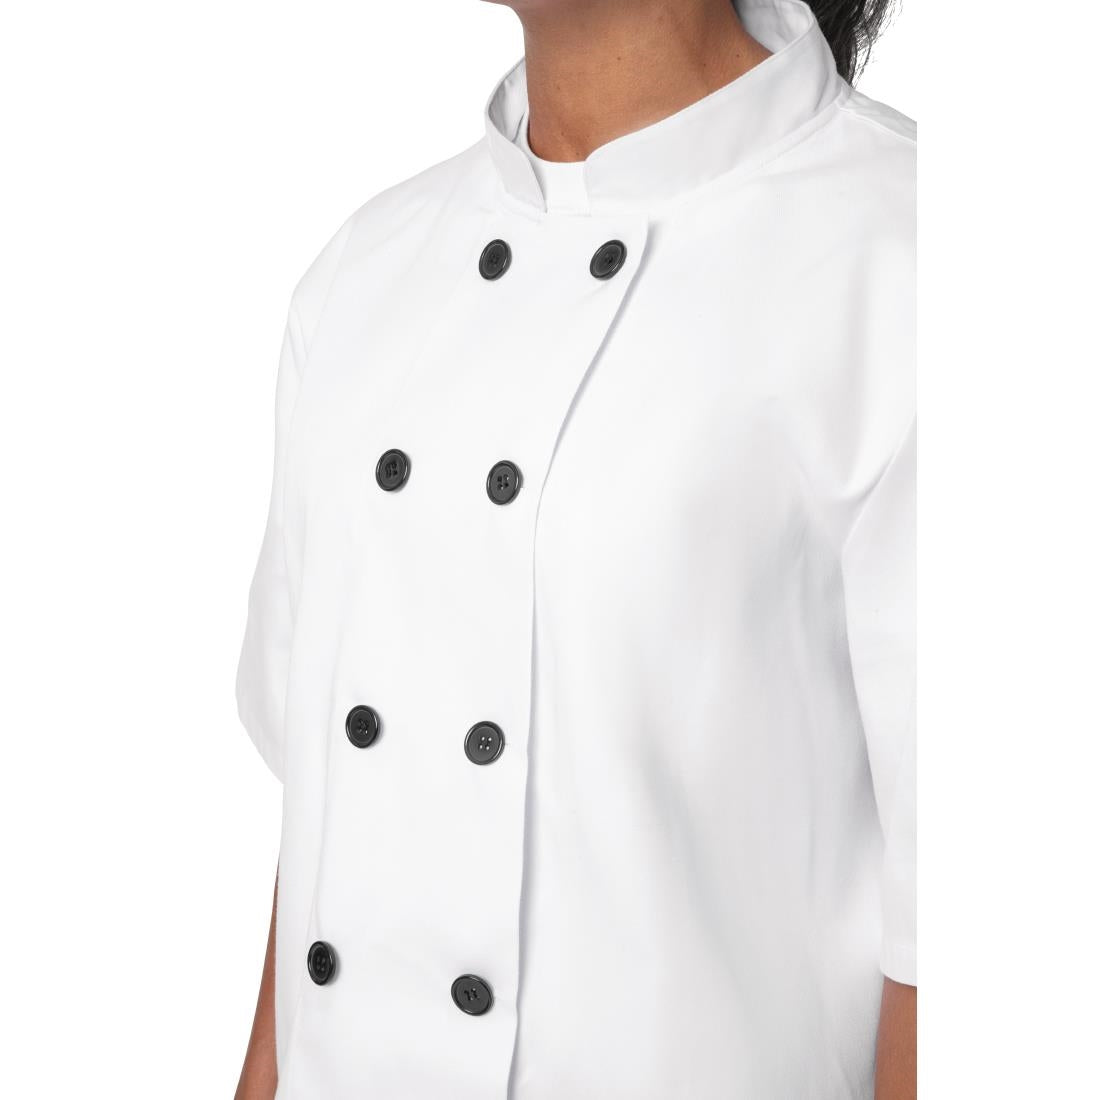 BB547-L Nisbets Essentials Short Sleeve Chefs Jacket White L (Pack of 2) JD Catering Equipment Solutions Ltd